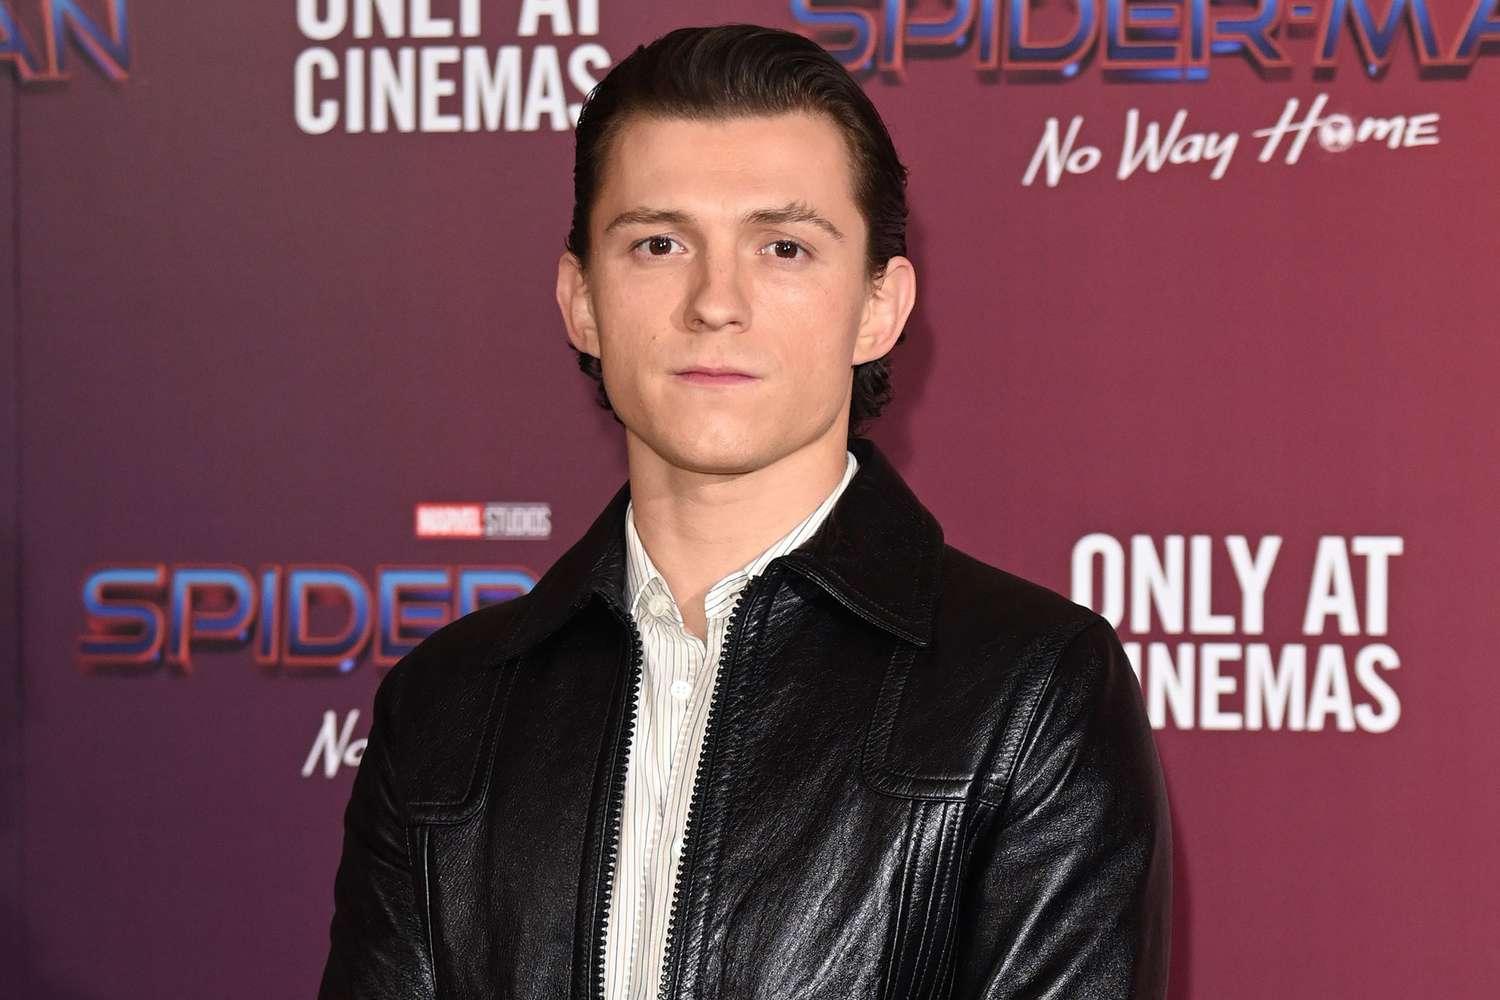 Tom Holland attends a photocall for "Spiderman: No Way Home" at The Old Sessions House on December 05, 2021 in London, England.